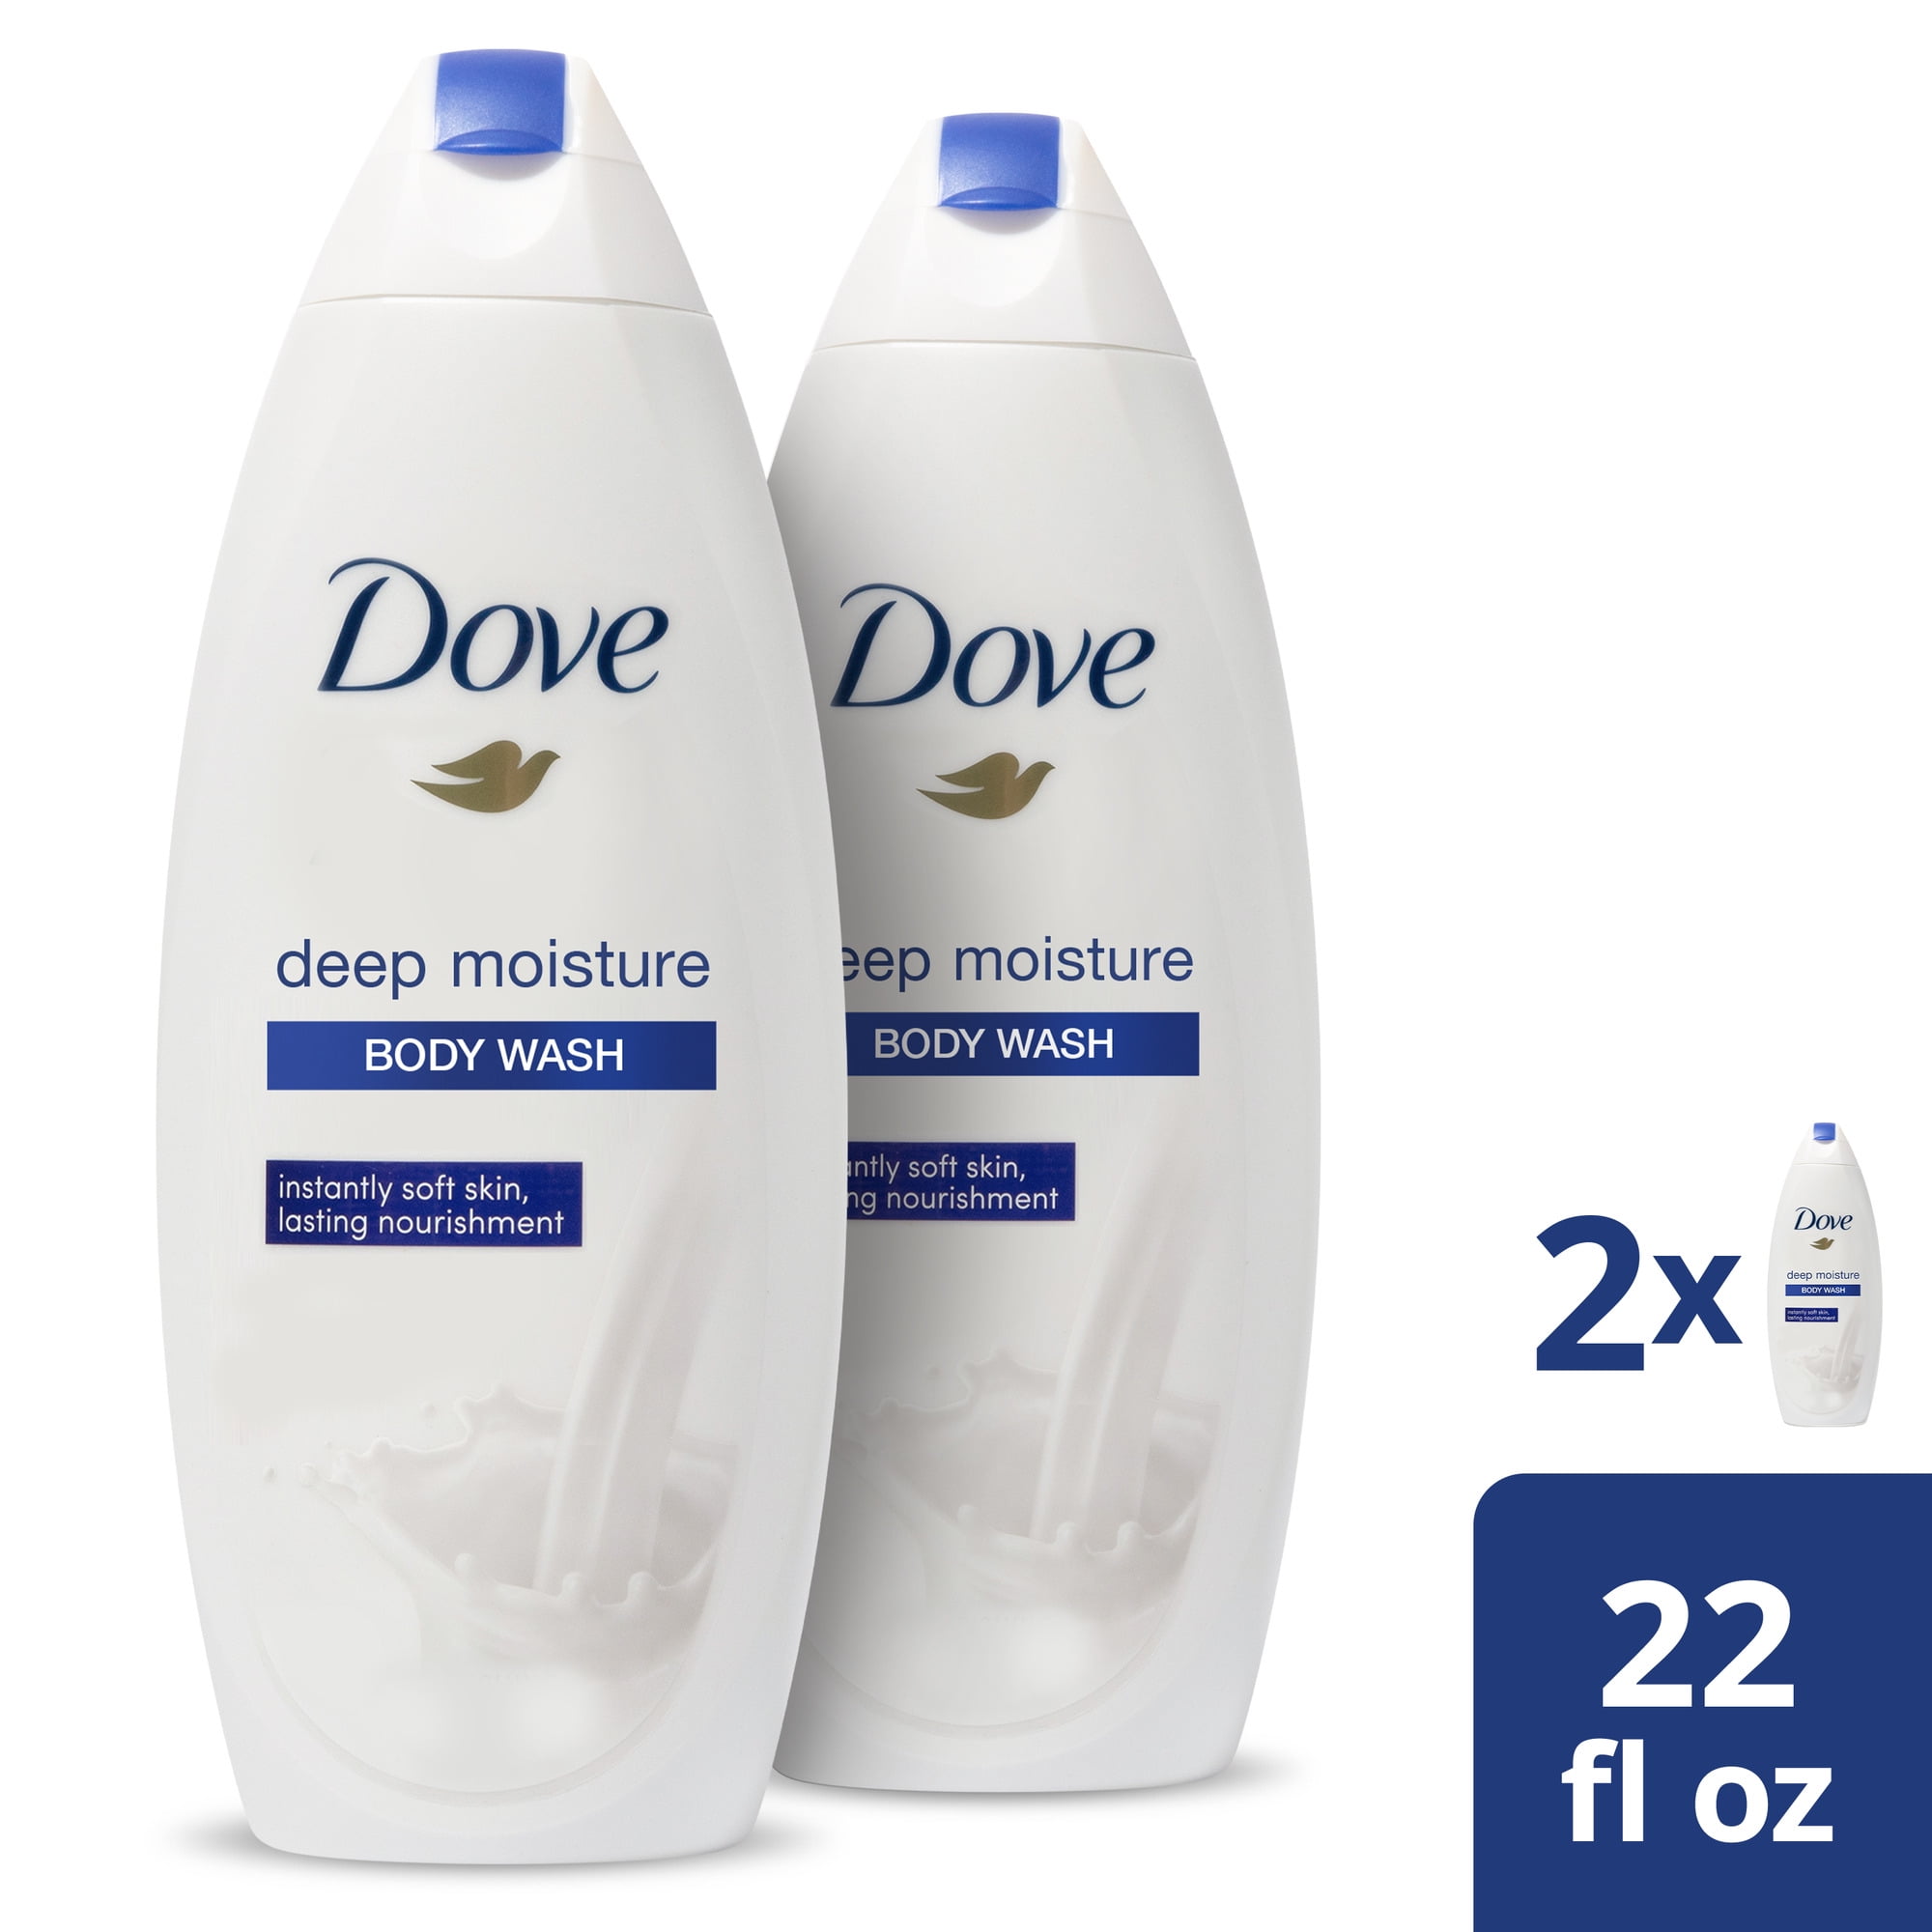 Dove Deep Moisture Skin Natural Nourishers for Instantly Soft Skin Body Wash 22 oz, 2 Count